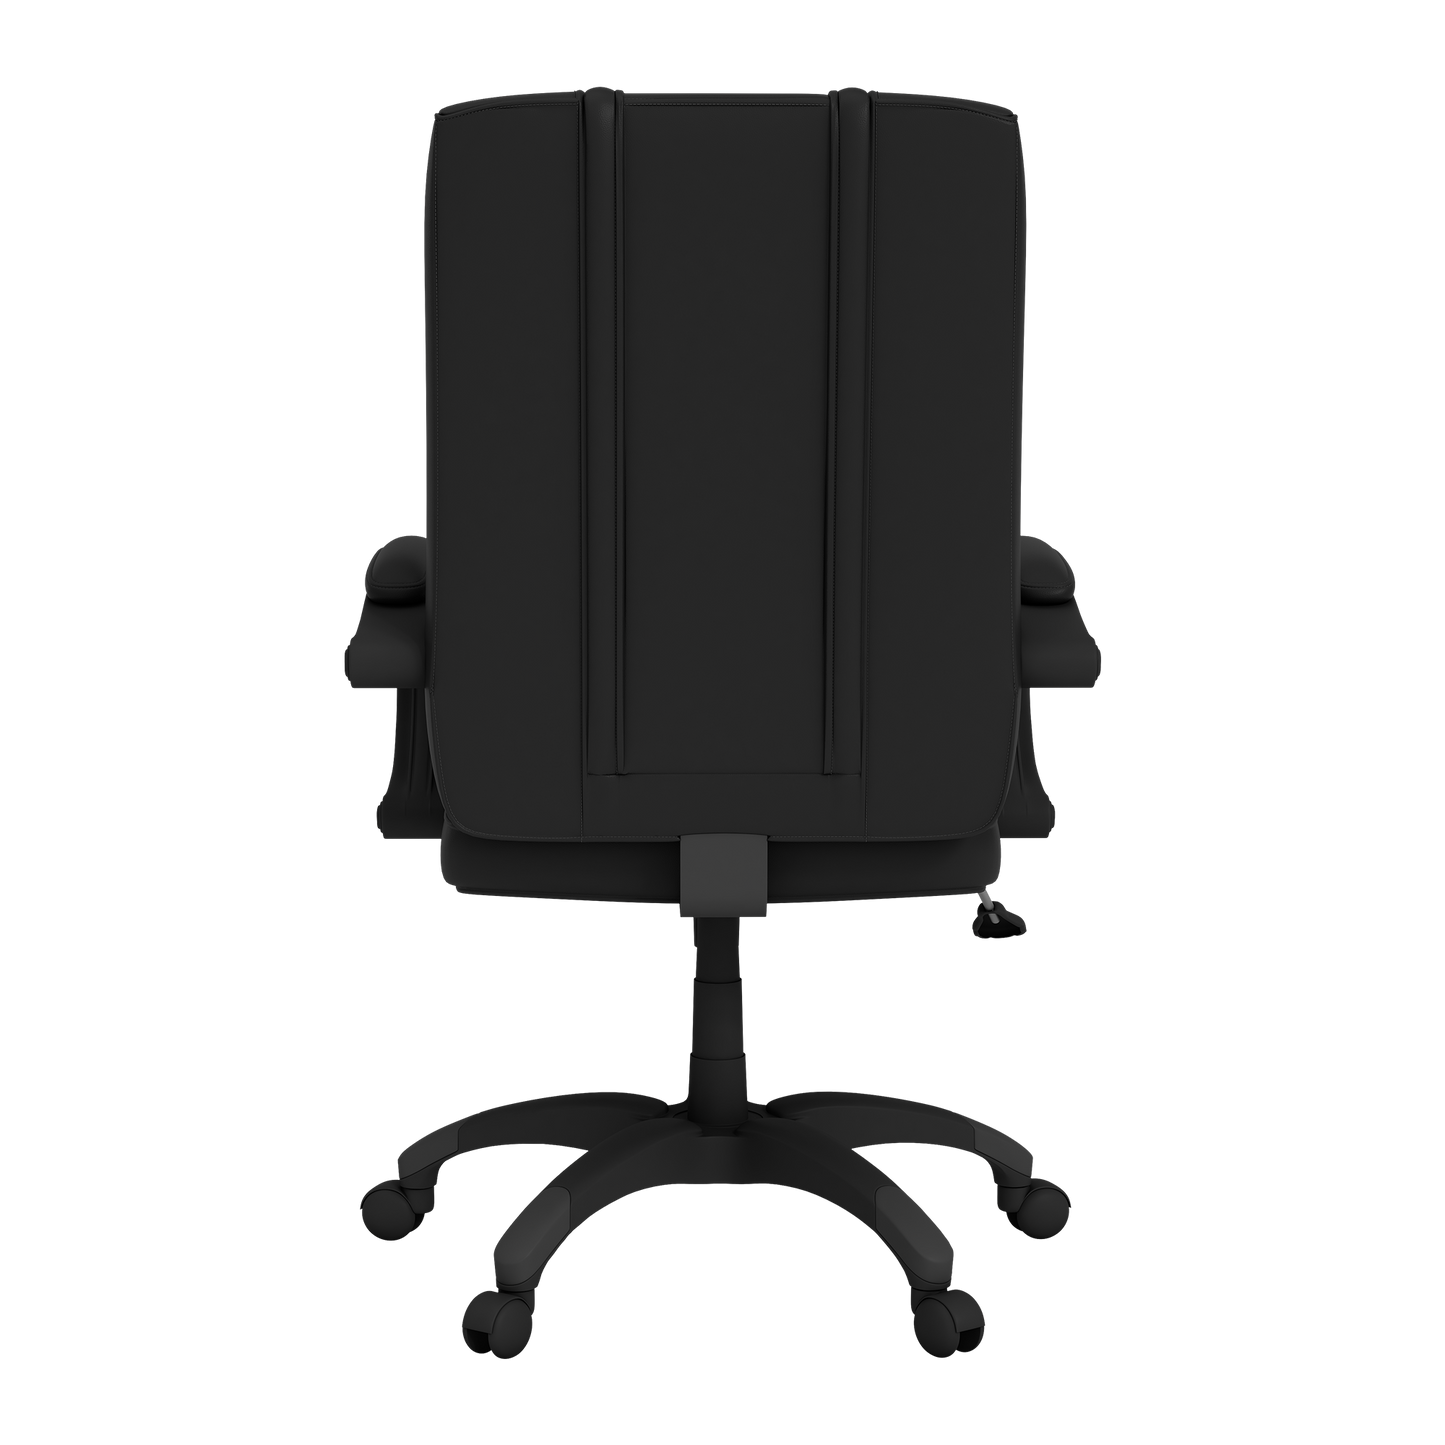 Office Chair 1000 with Arizona Coyotes Primary Logo